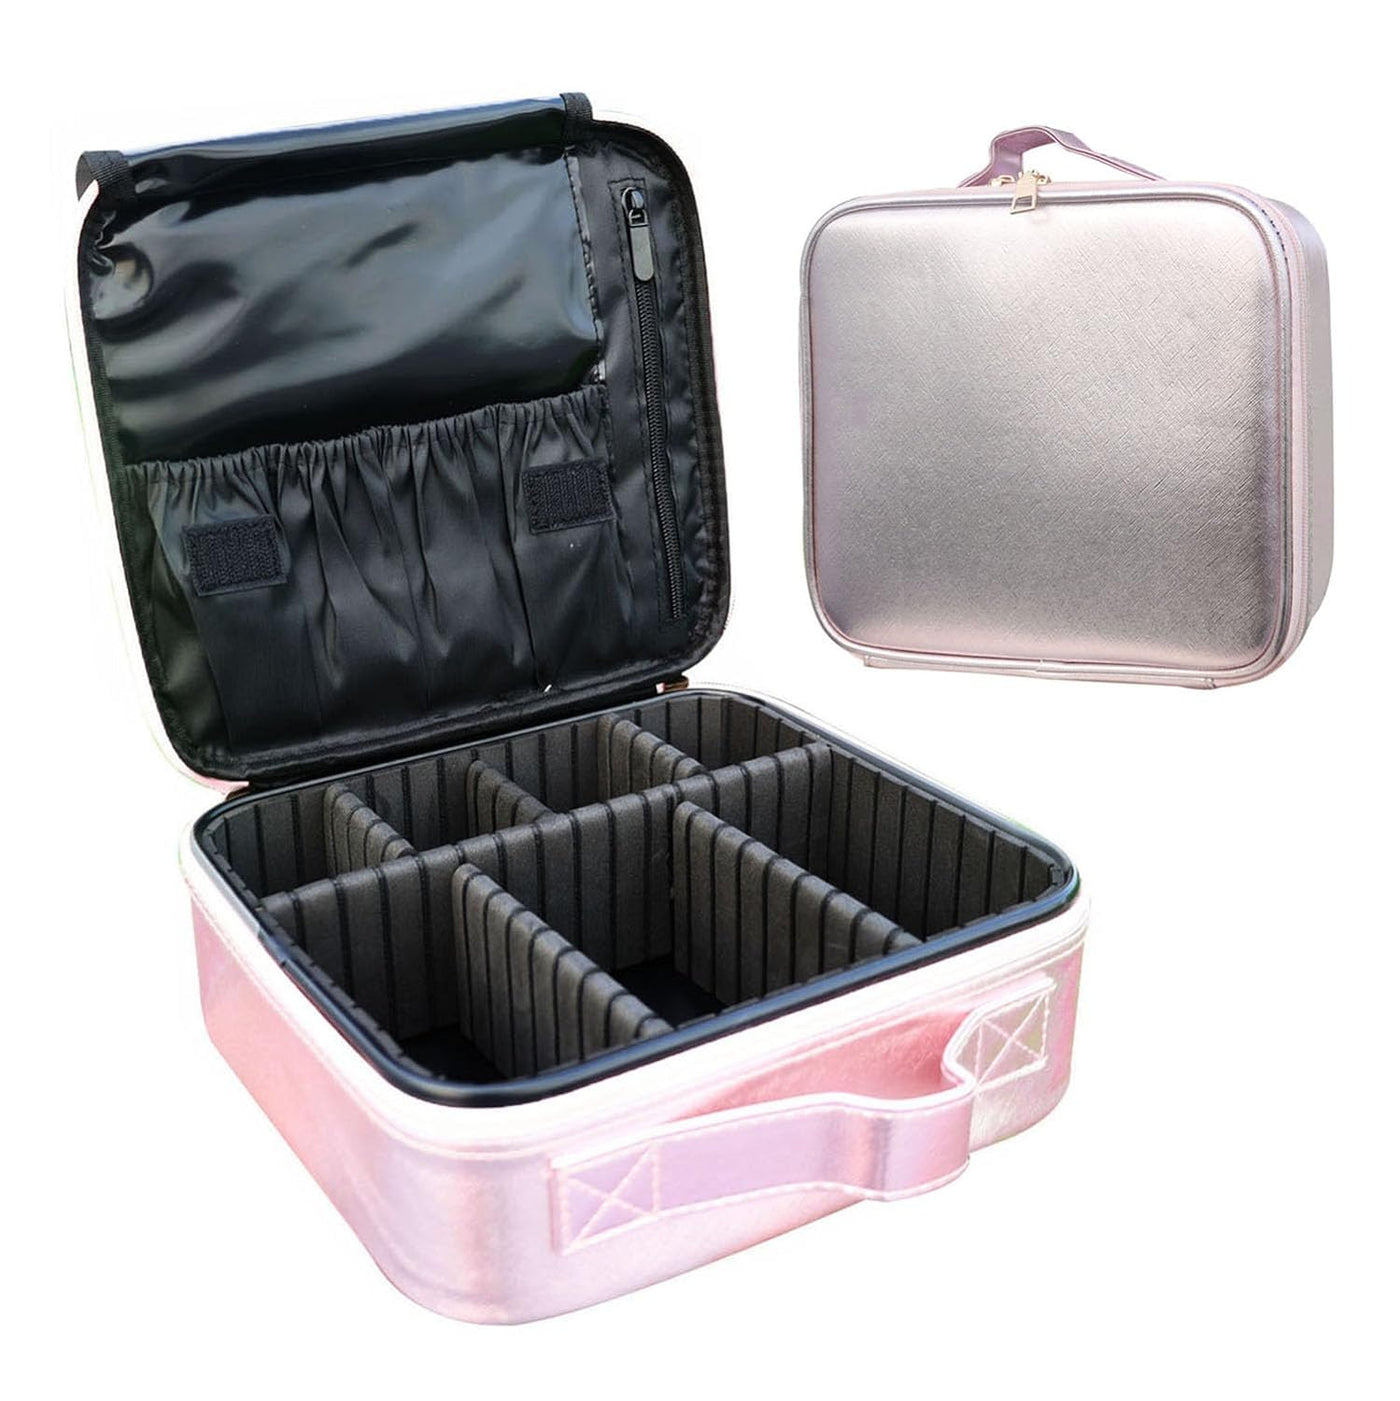 Makeup Cosmetic Storage Case with Adjustable Compartment (Shimmer Light Pink)